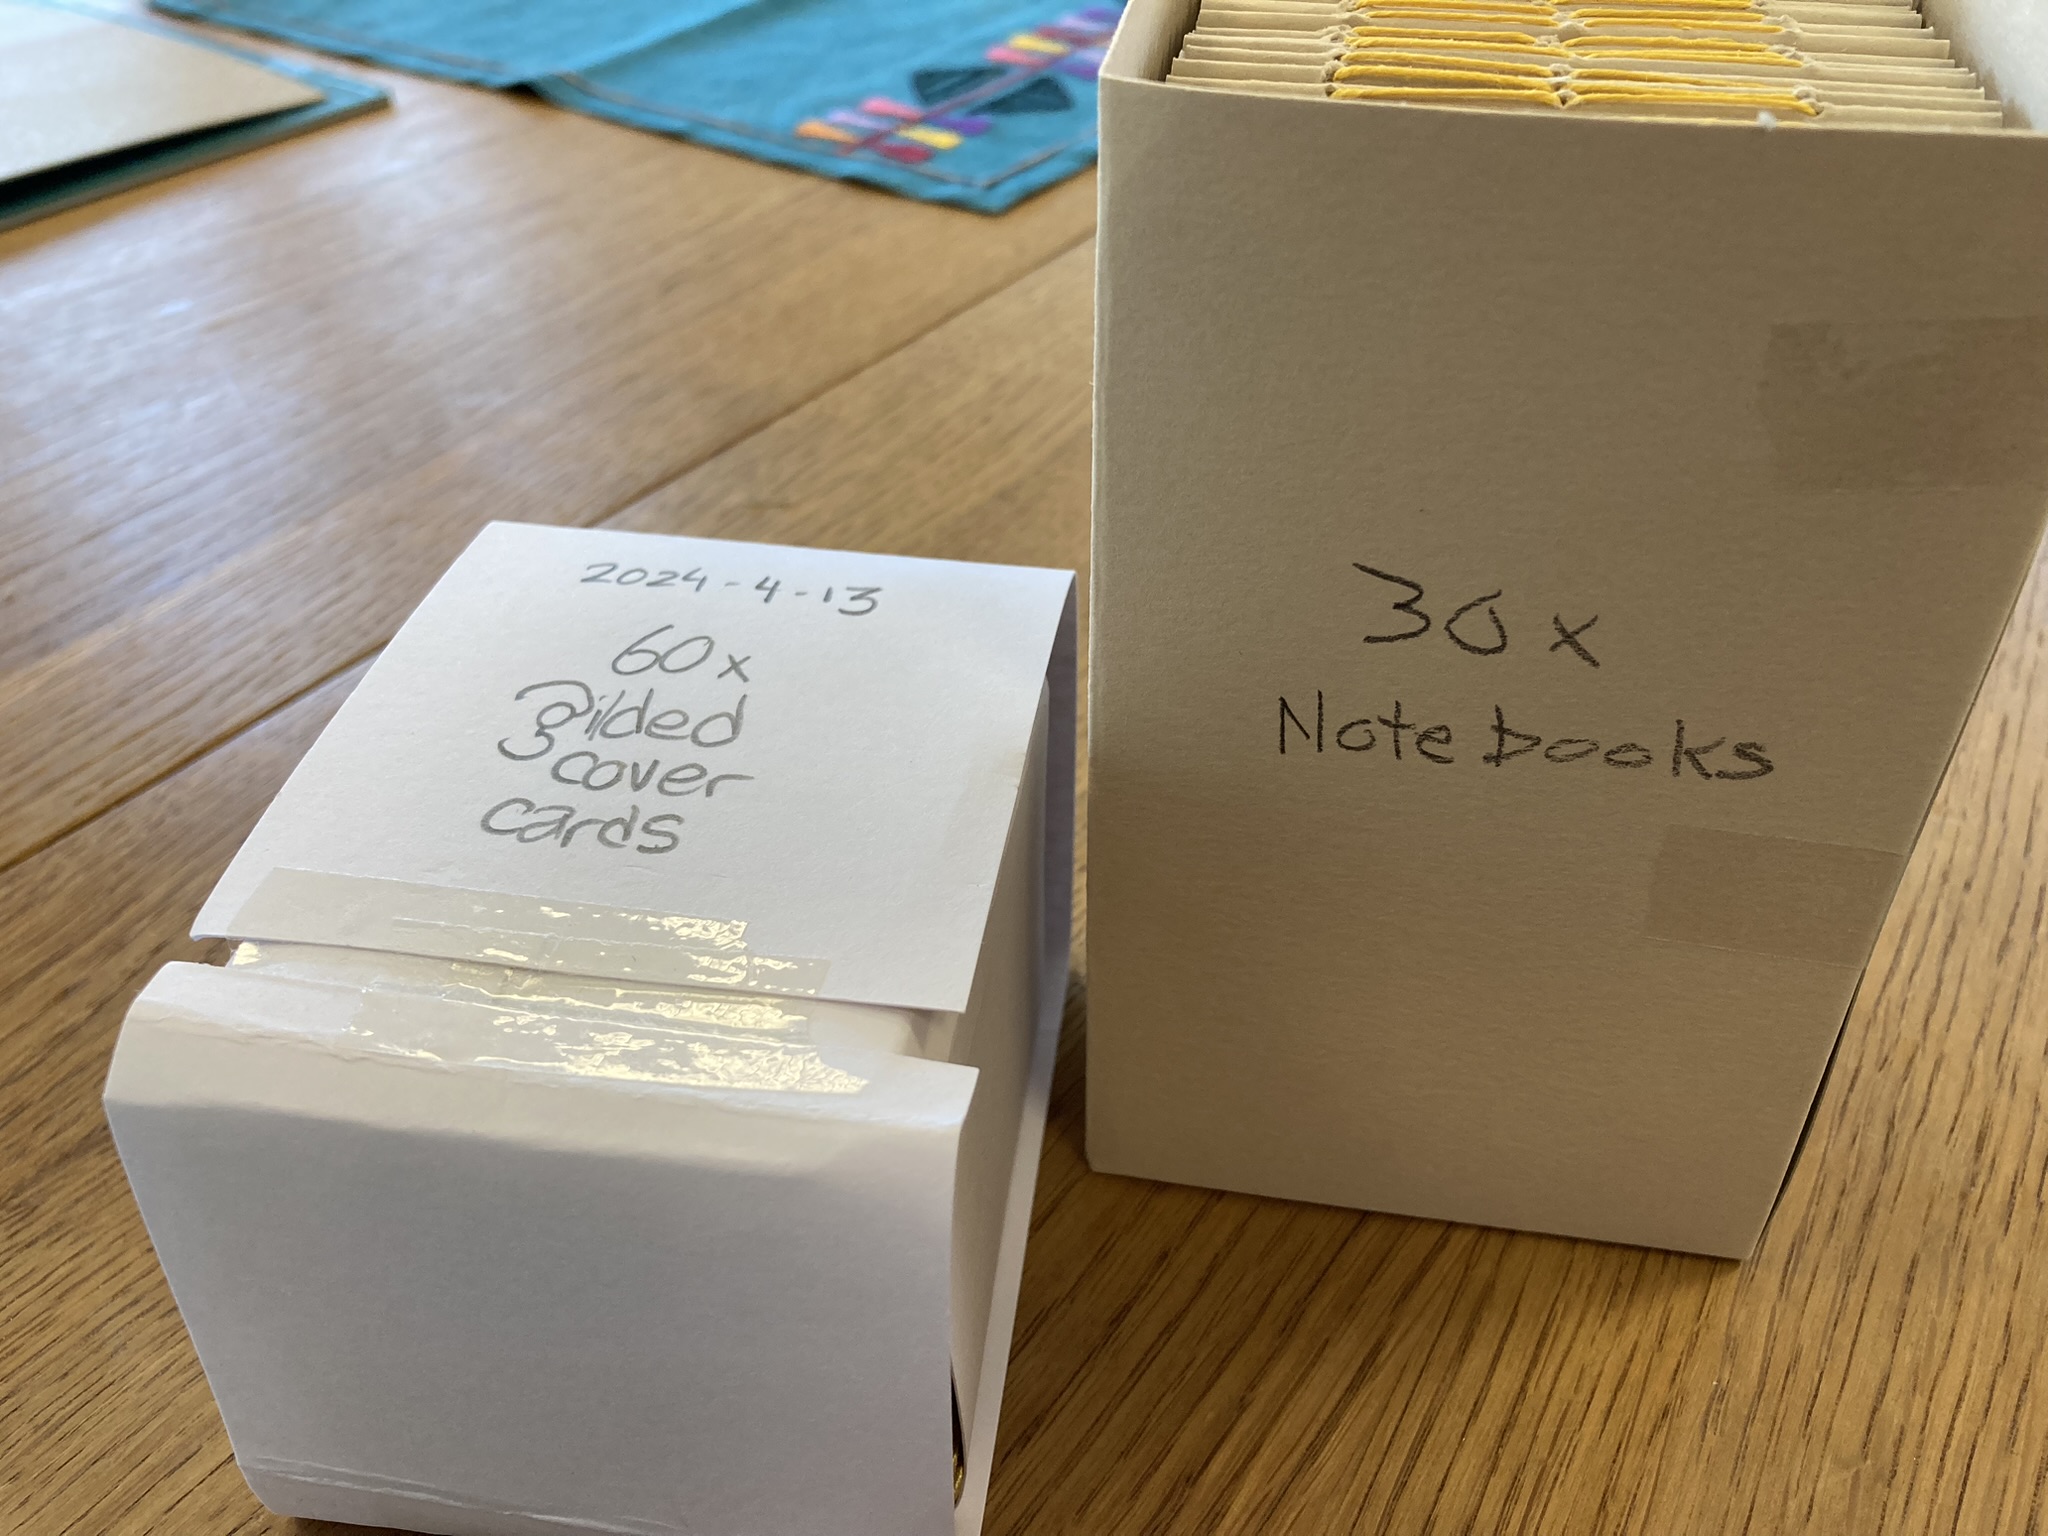 Package of notebooks and package of cards to glue to them.